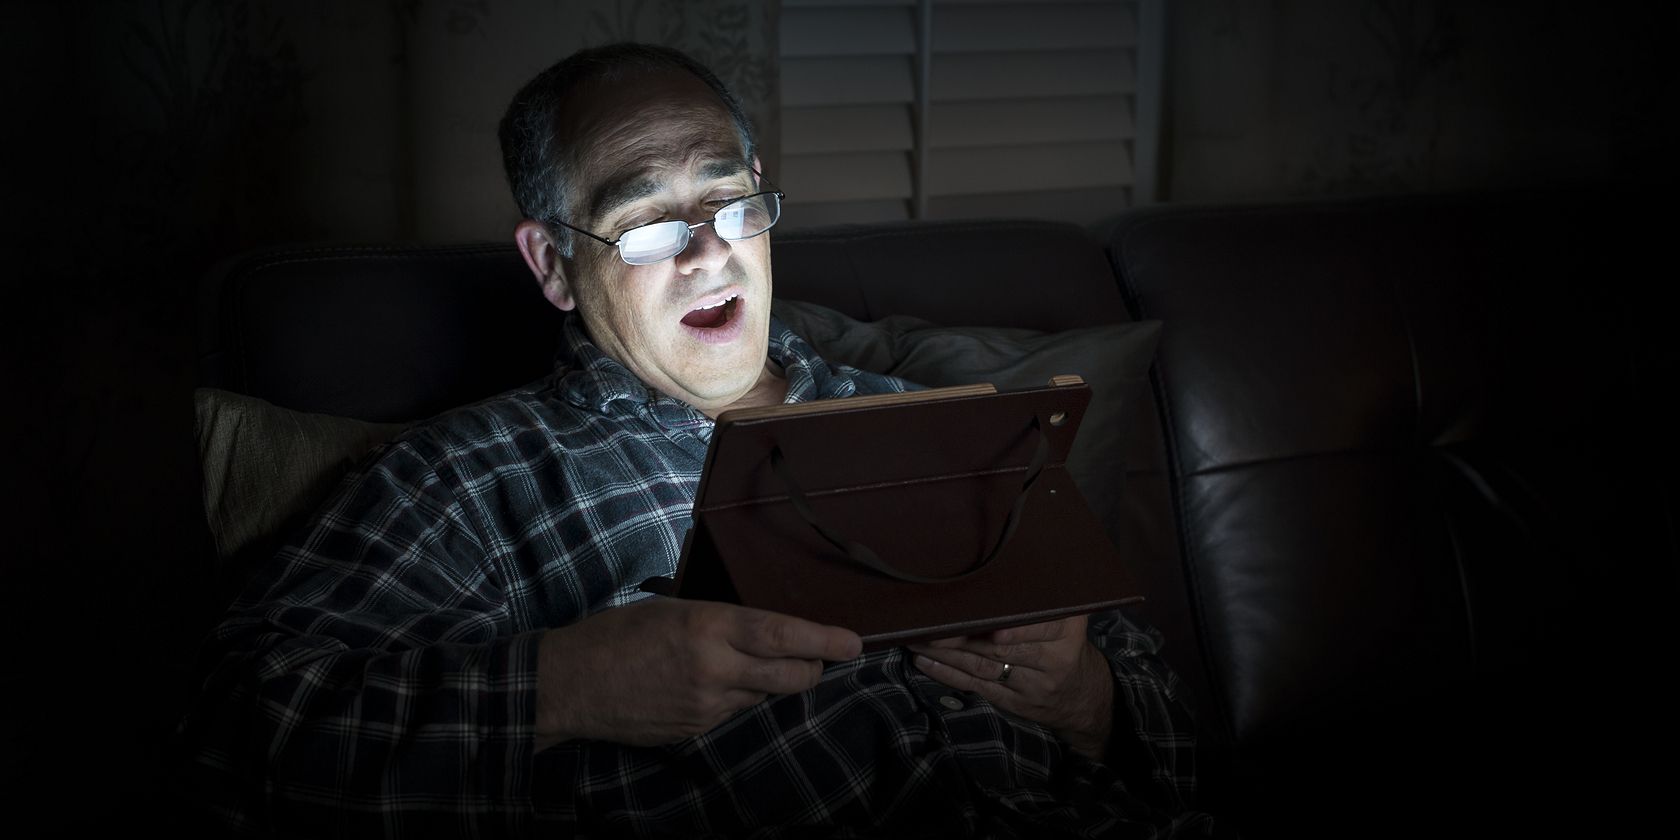 Man reading computer tablet in the dark with its bright light shining in his face